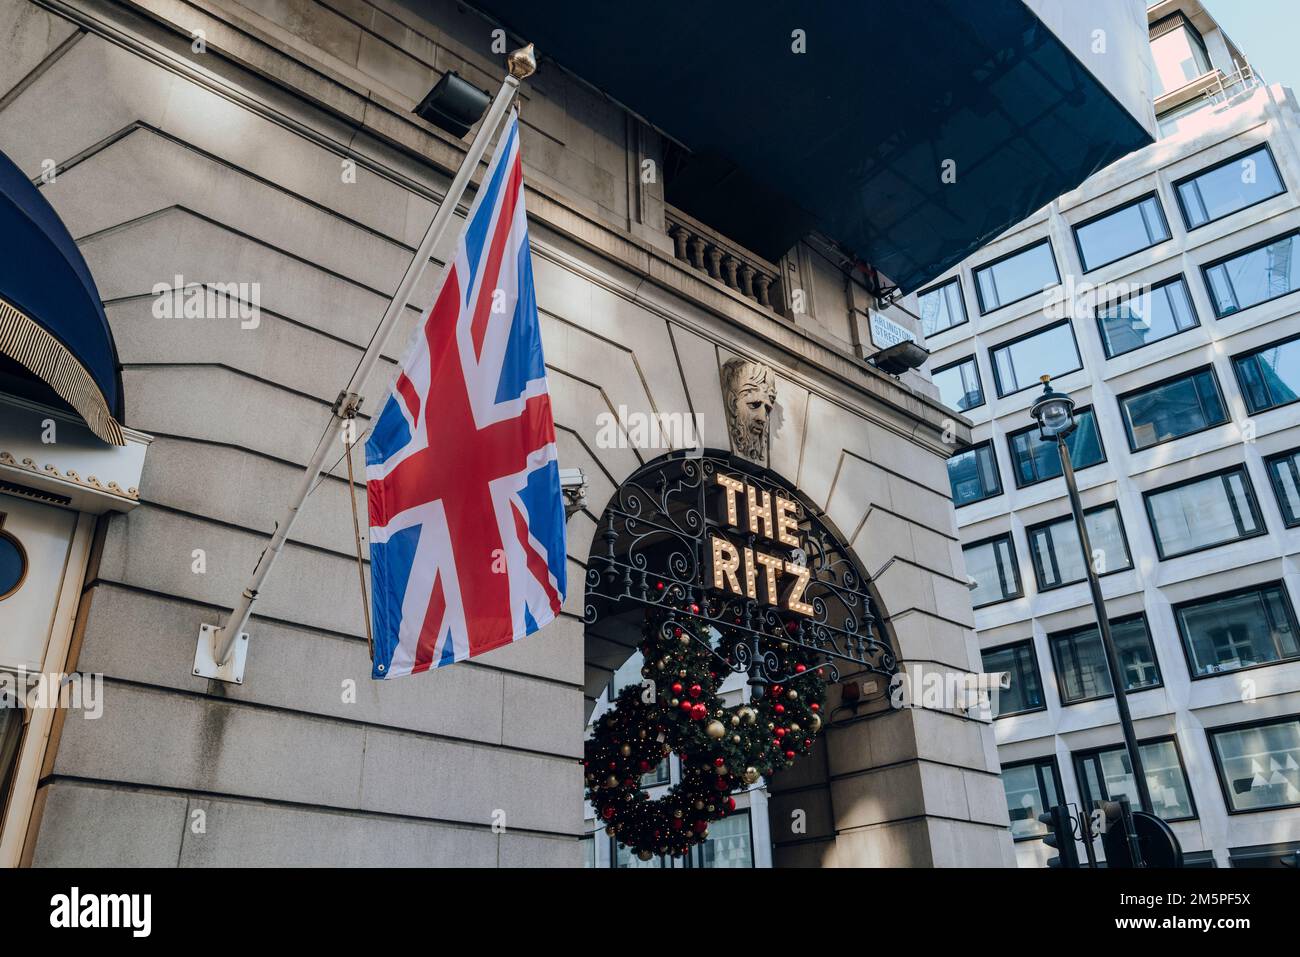 London, UK - December 26, 2022: Sign outside The Ritz, London's most iconic hotel, next to the Union Jack flag on a pole. Stock Photo